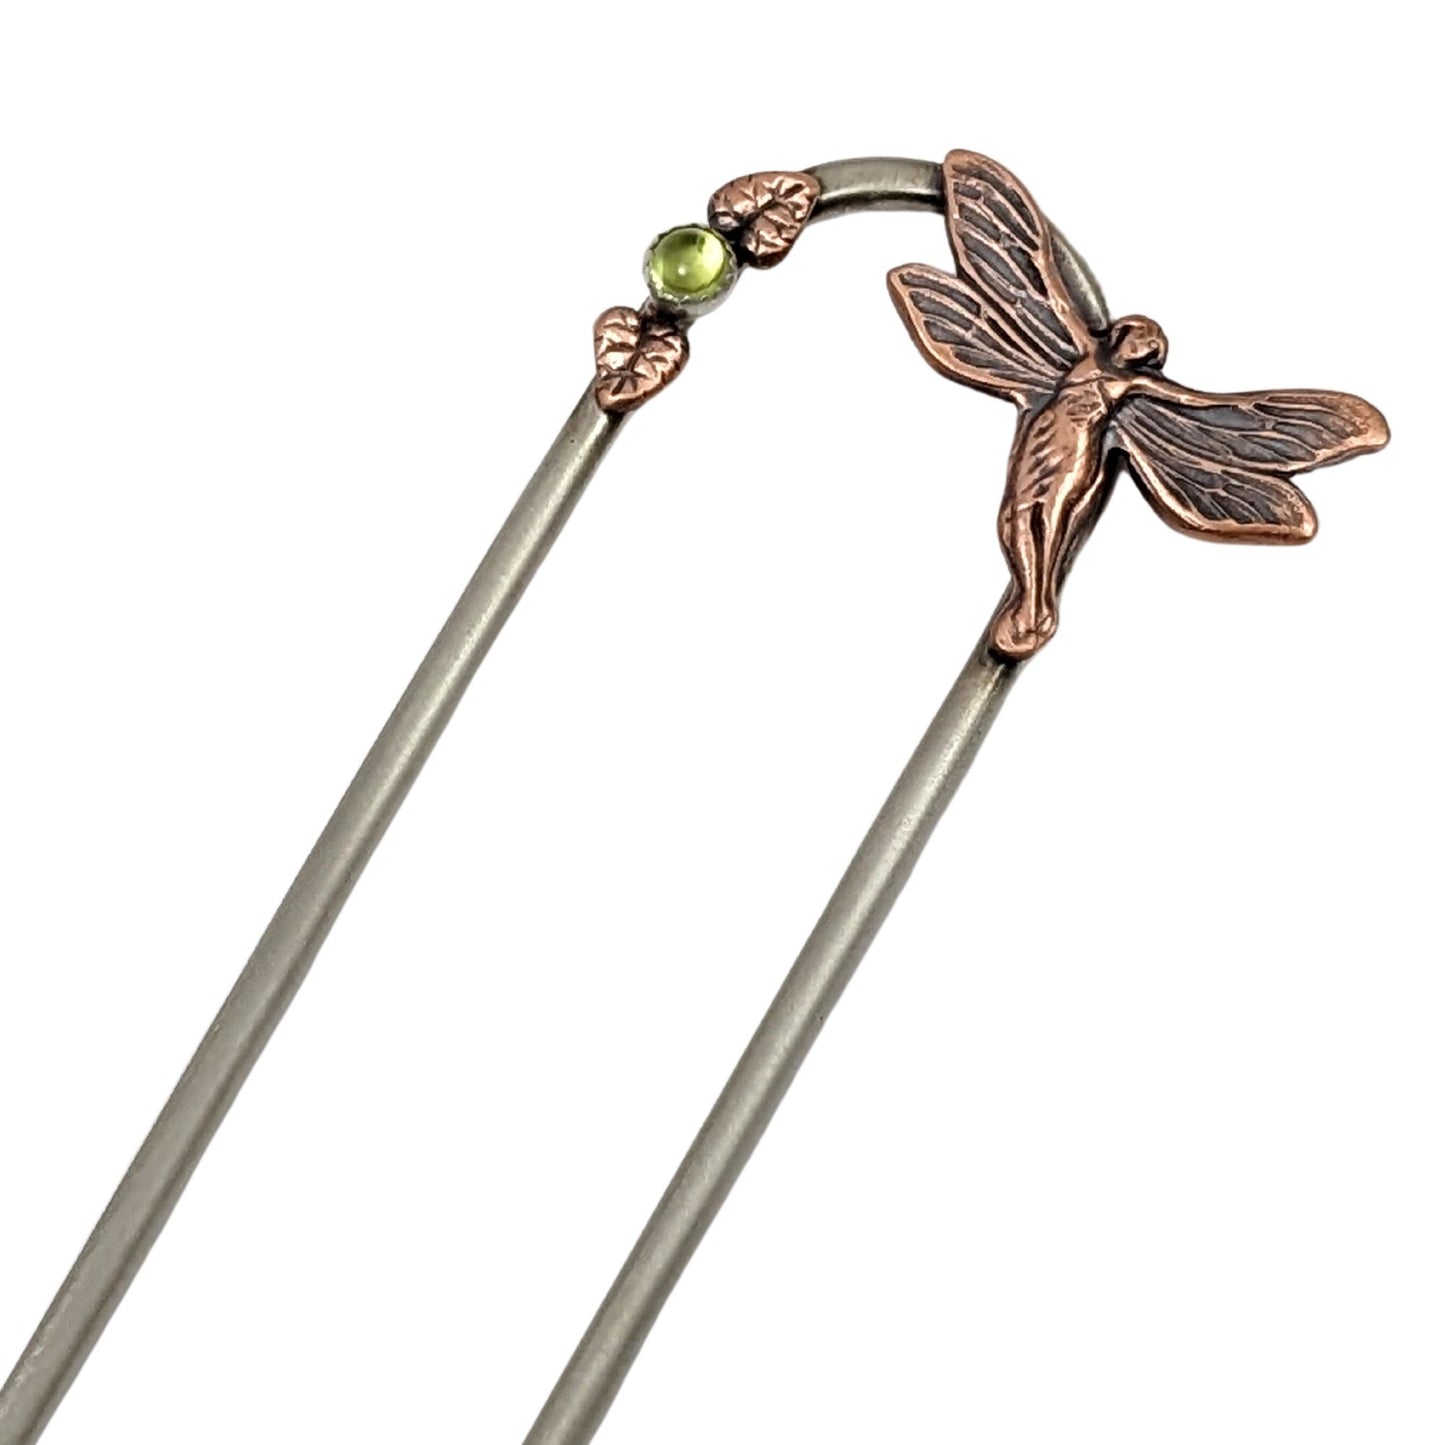 Fairy Hair Fork. At top left side there is a three dimension fairy with her wings spread. On the left side is a green peridot gemstone with one copper leaf above the stone and one below. The fork is nickel.